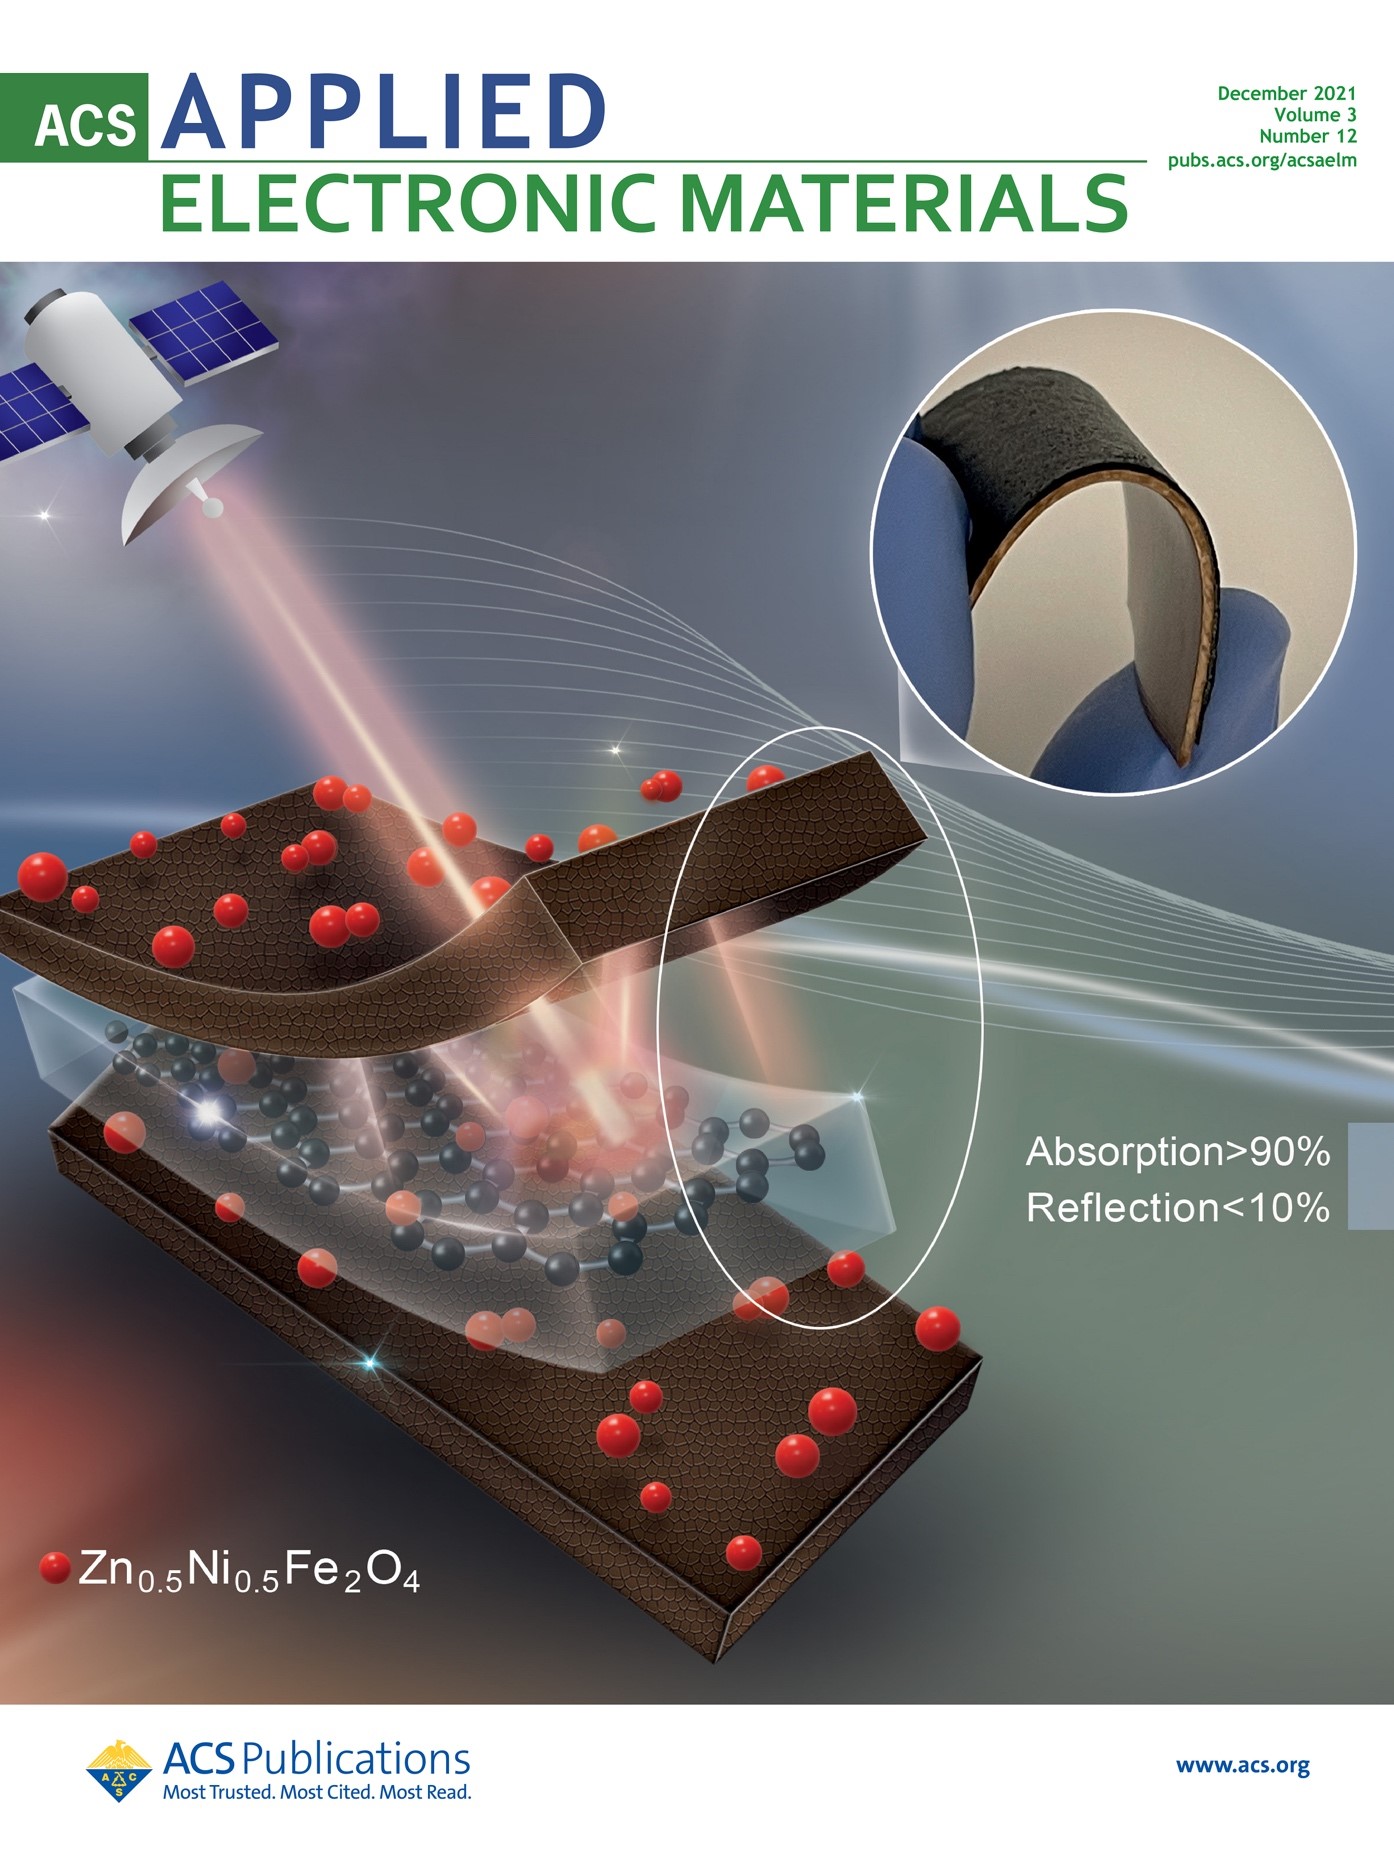 The cover of the December 2021 edition of Applied Electronic Materials